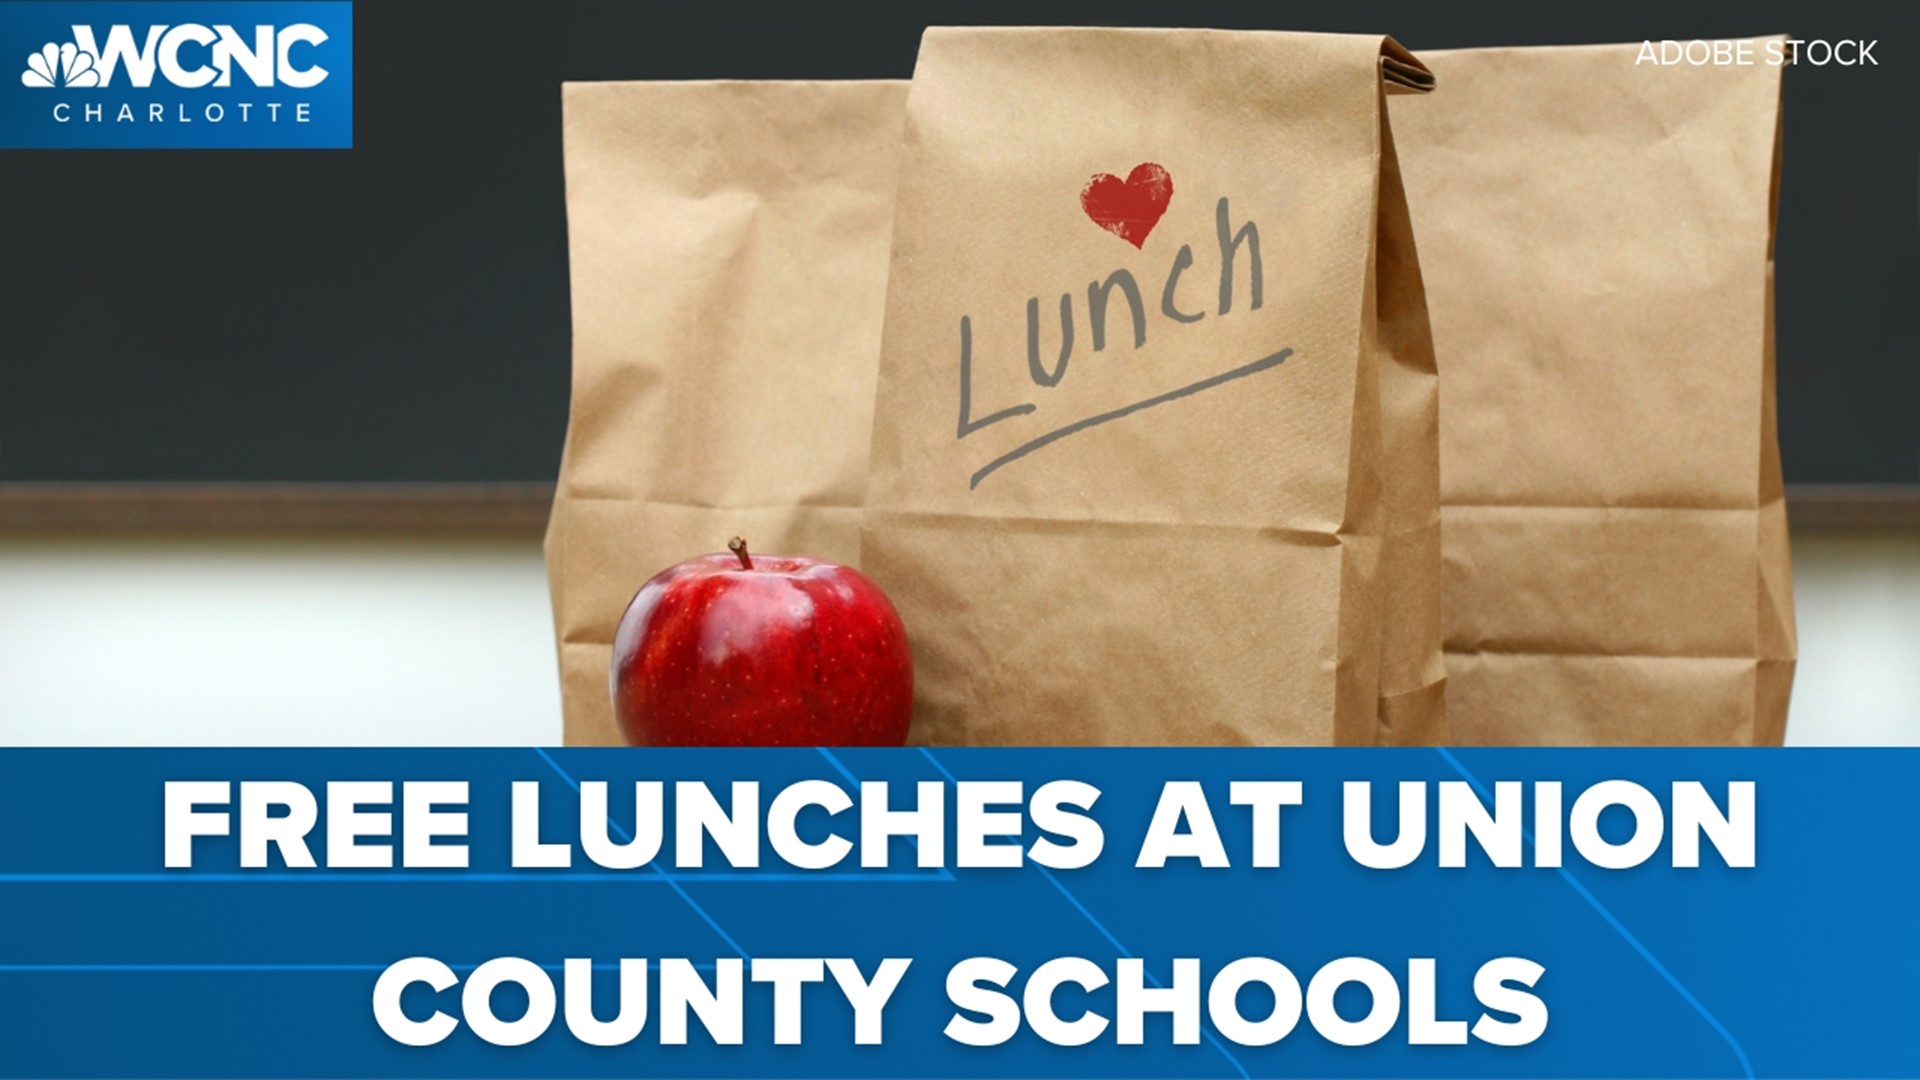 Union County public schools will provide free lunches all summer. Lunches will be served from 11am-1pm at Monroe Middle School starting June 13th.